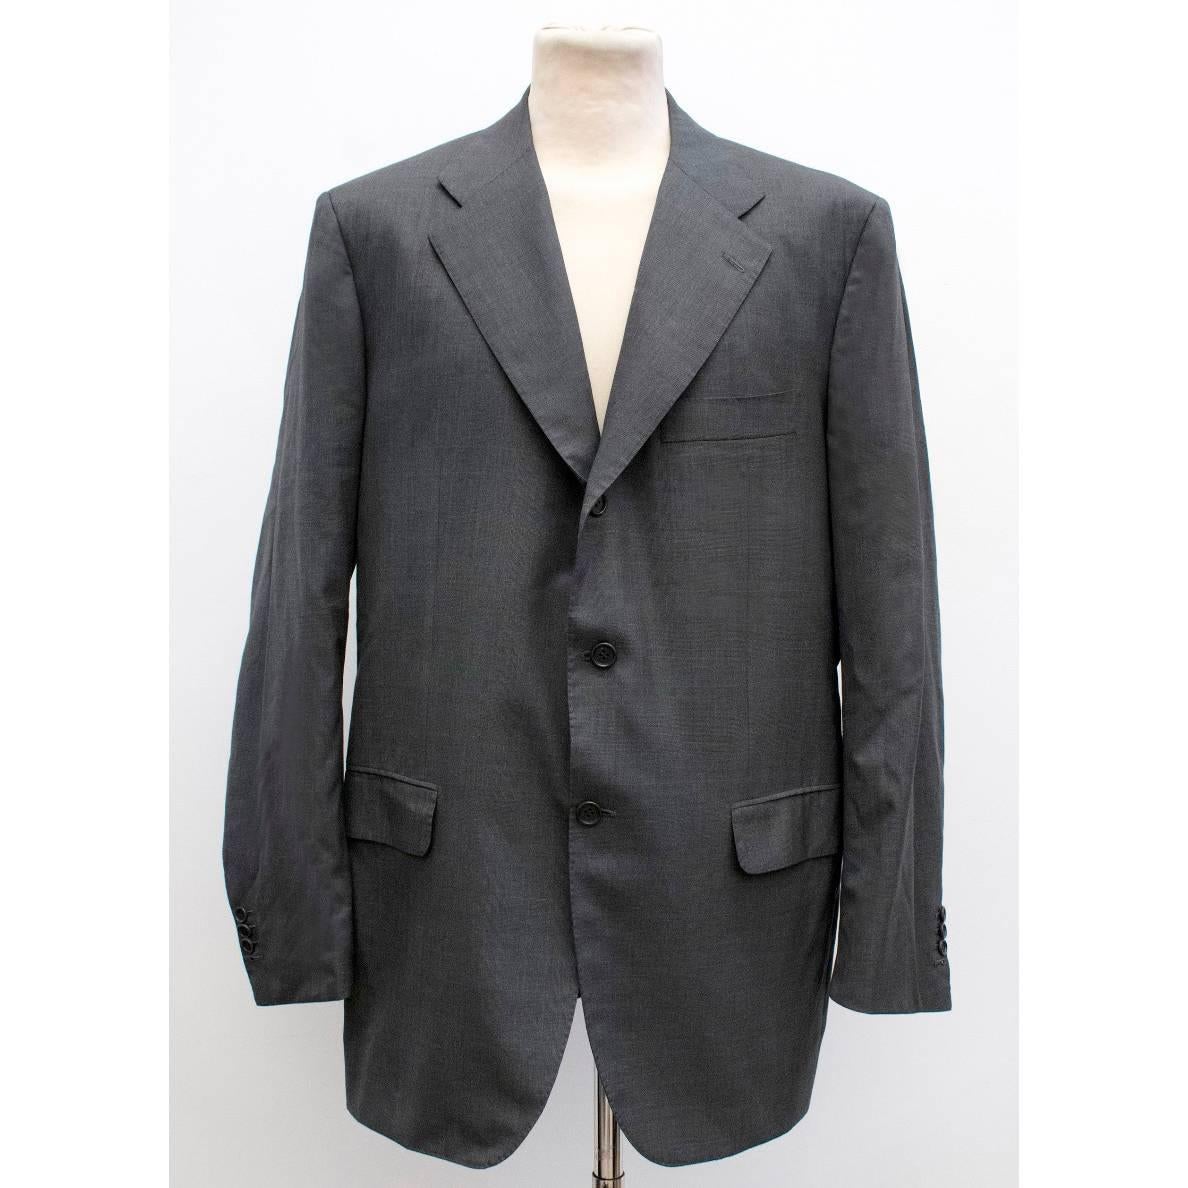 Kiton Wool Check Suit For Sale 3